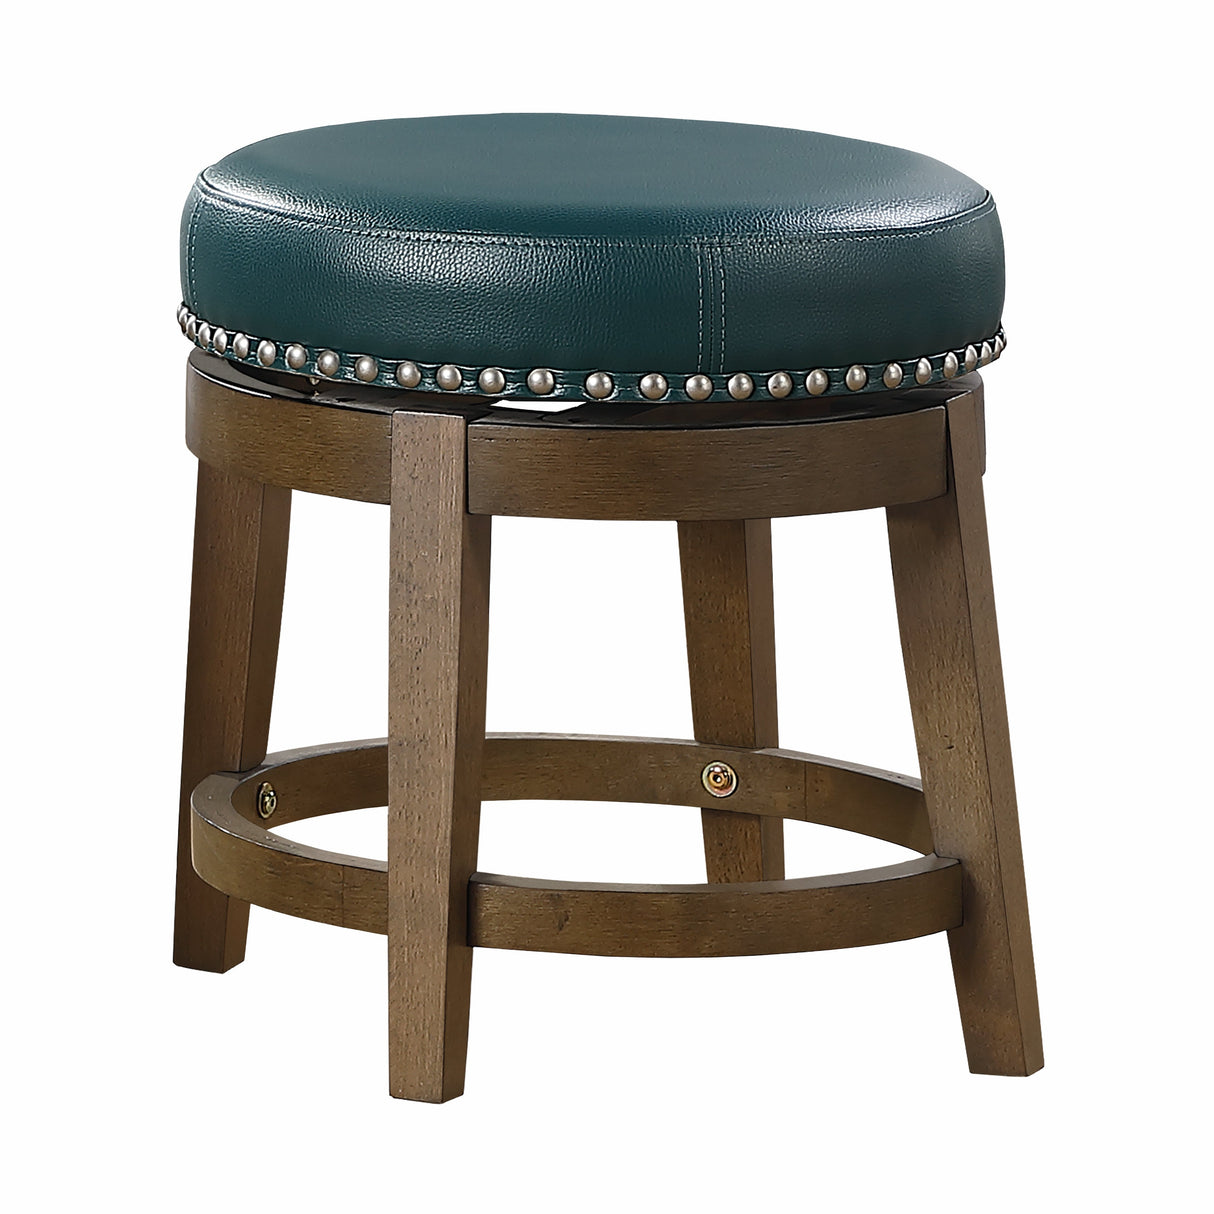 Westby Green/Brown Round Swivel Stool, Green, Set of 2